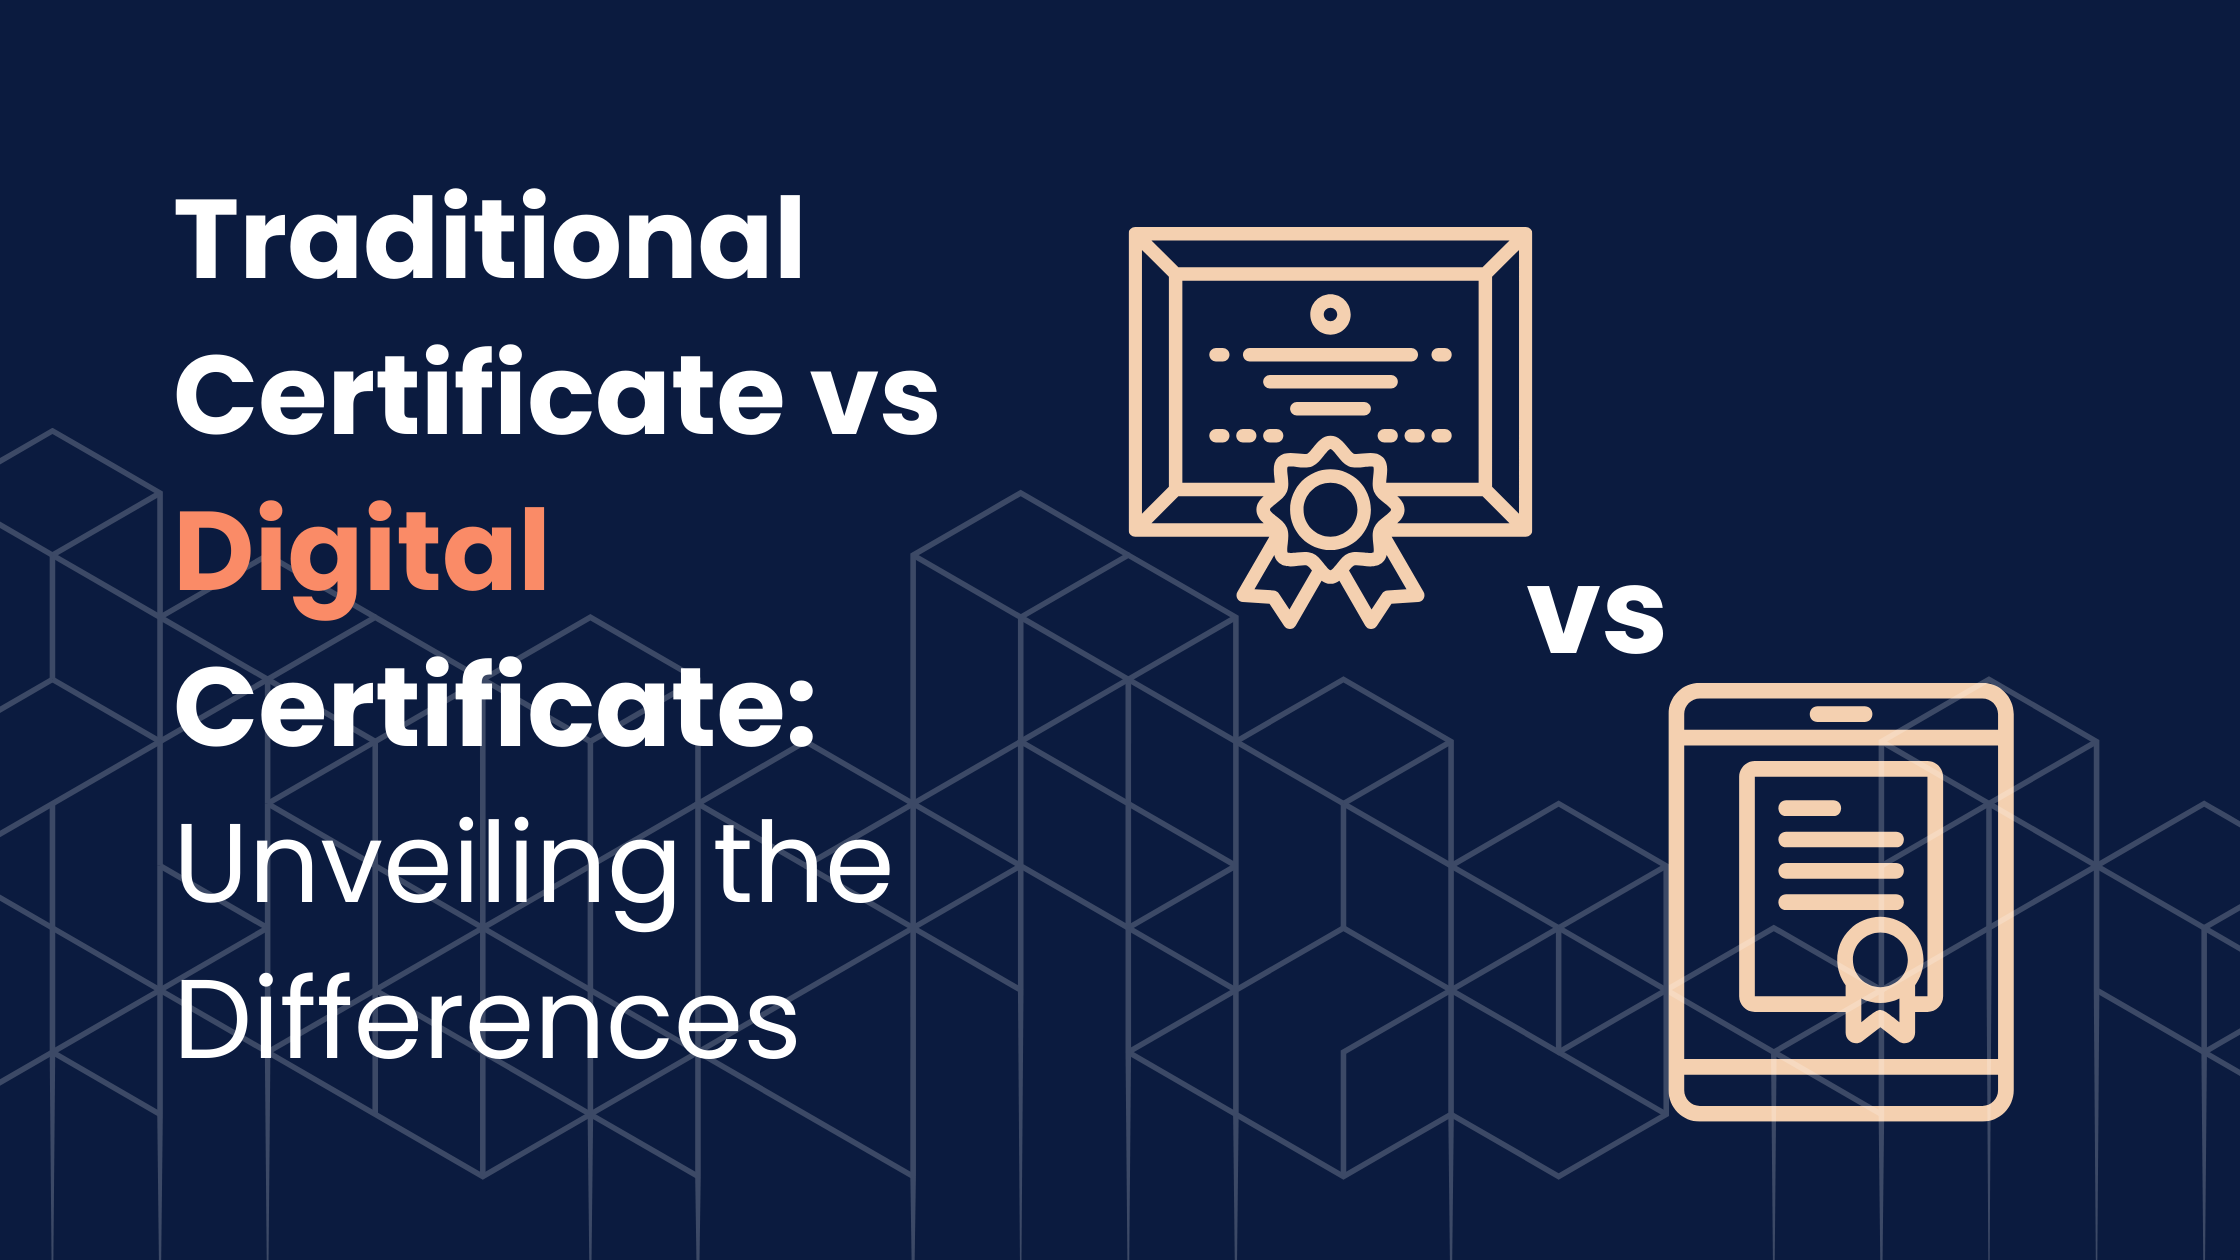 Traditional Certificate vs Digital Certificate: Unveiling the Differences